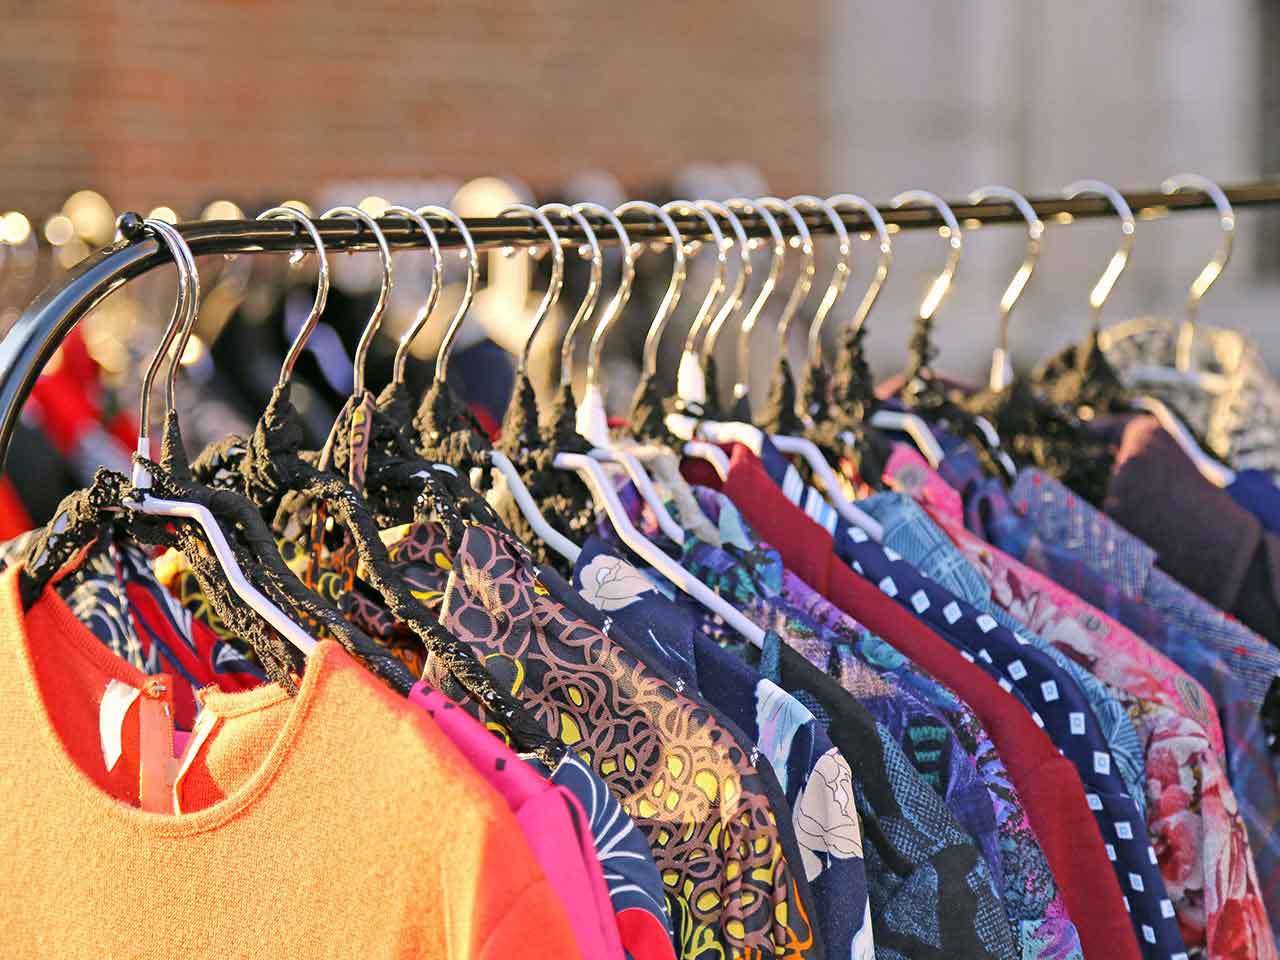 Rack of vintage clothes